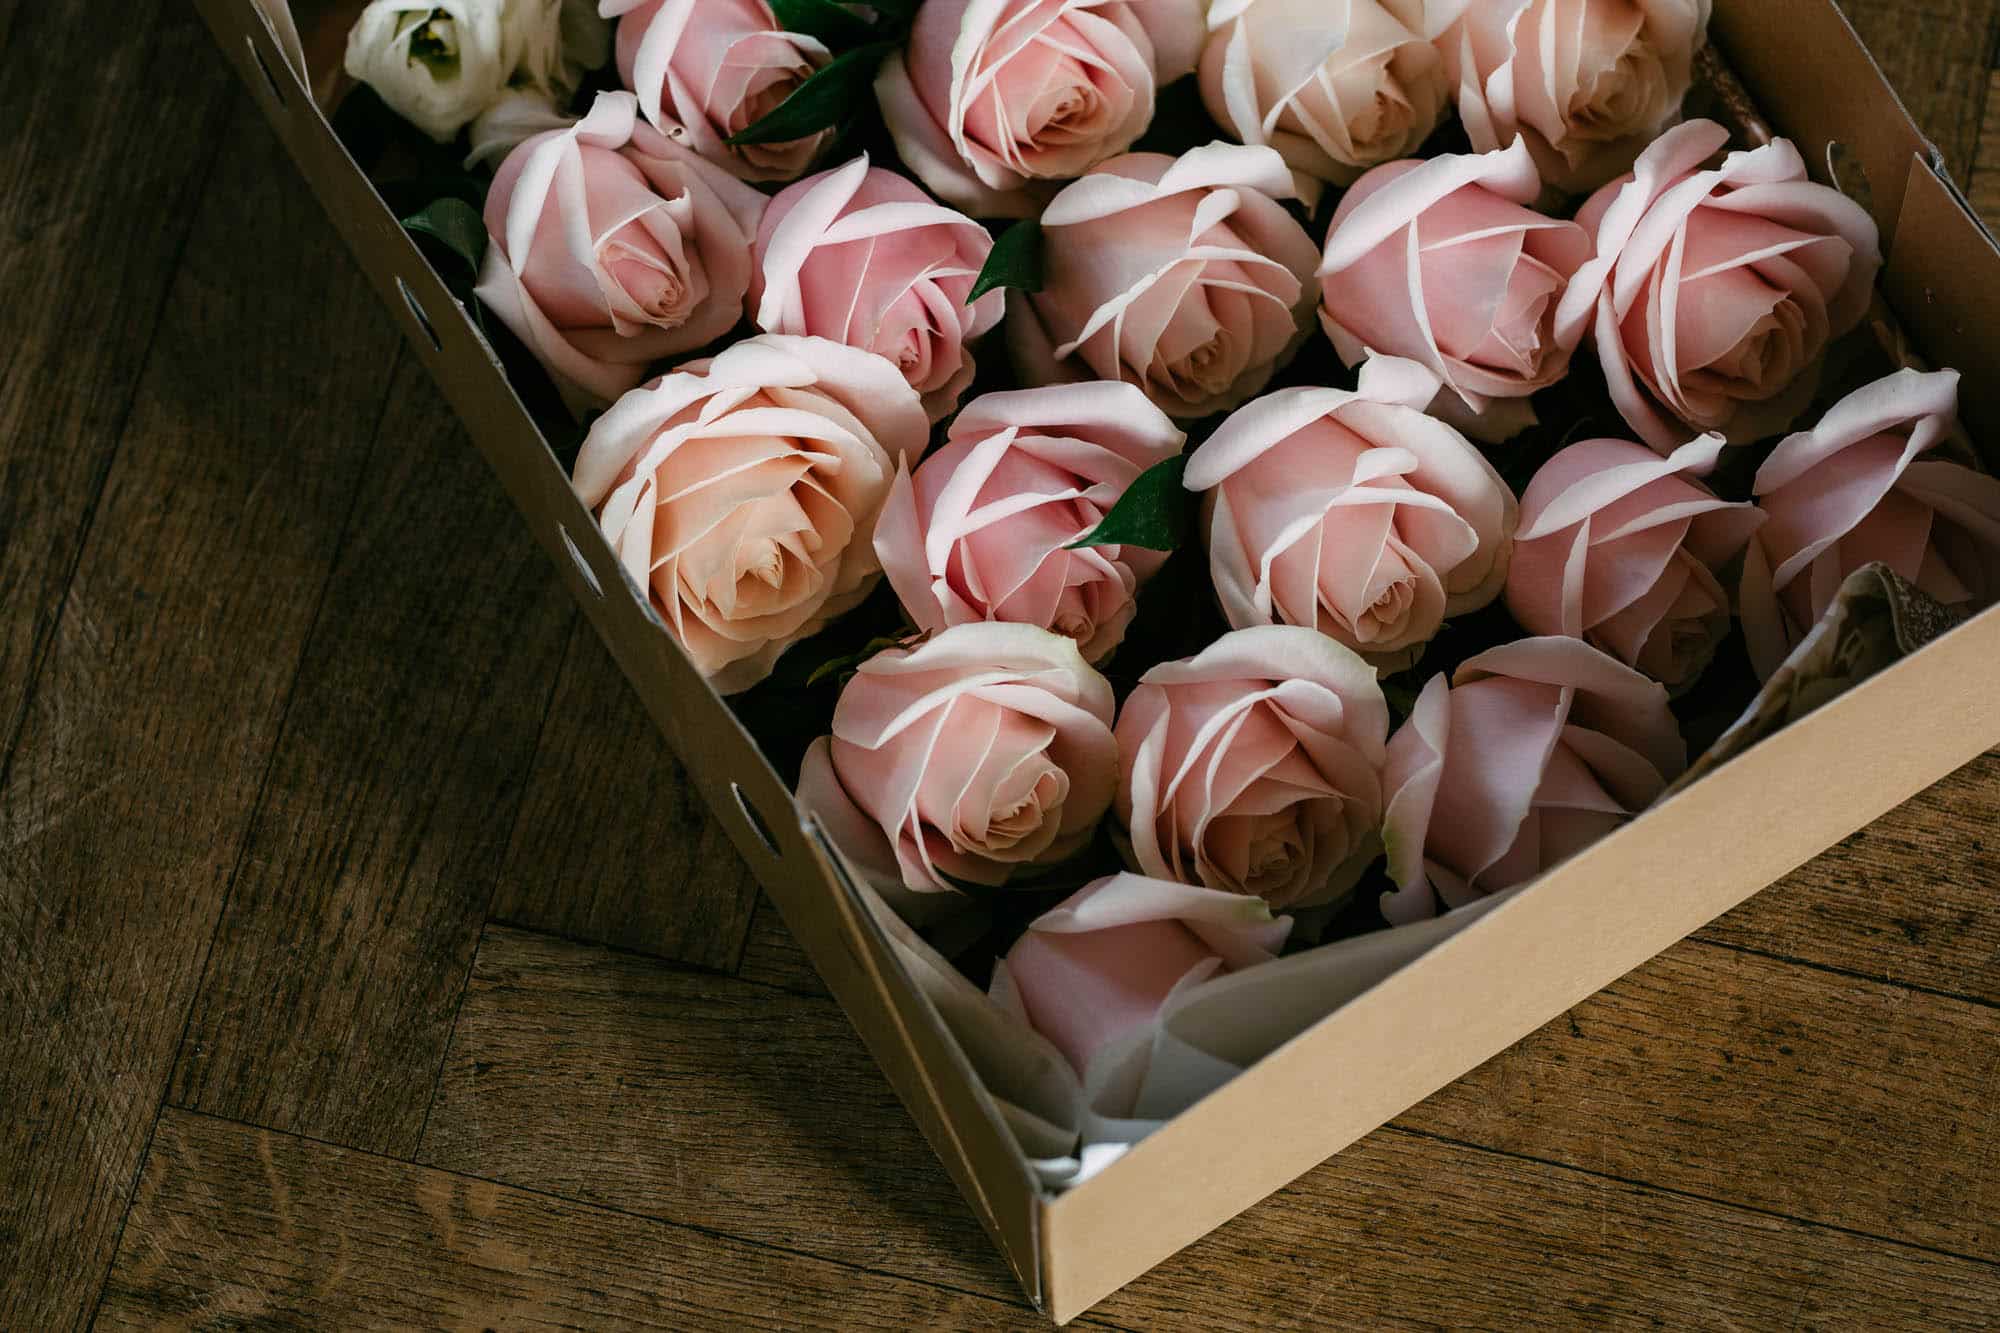 Pink and white roses in a box on a wooden floor showing the delicate beauty of flowers.